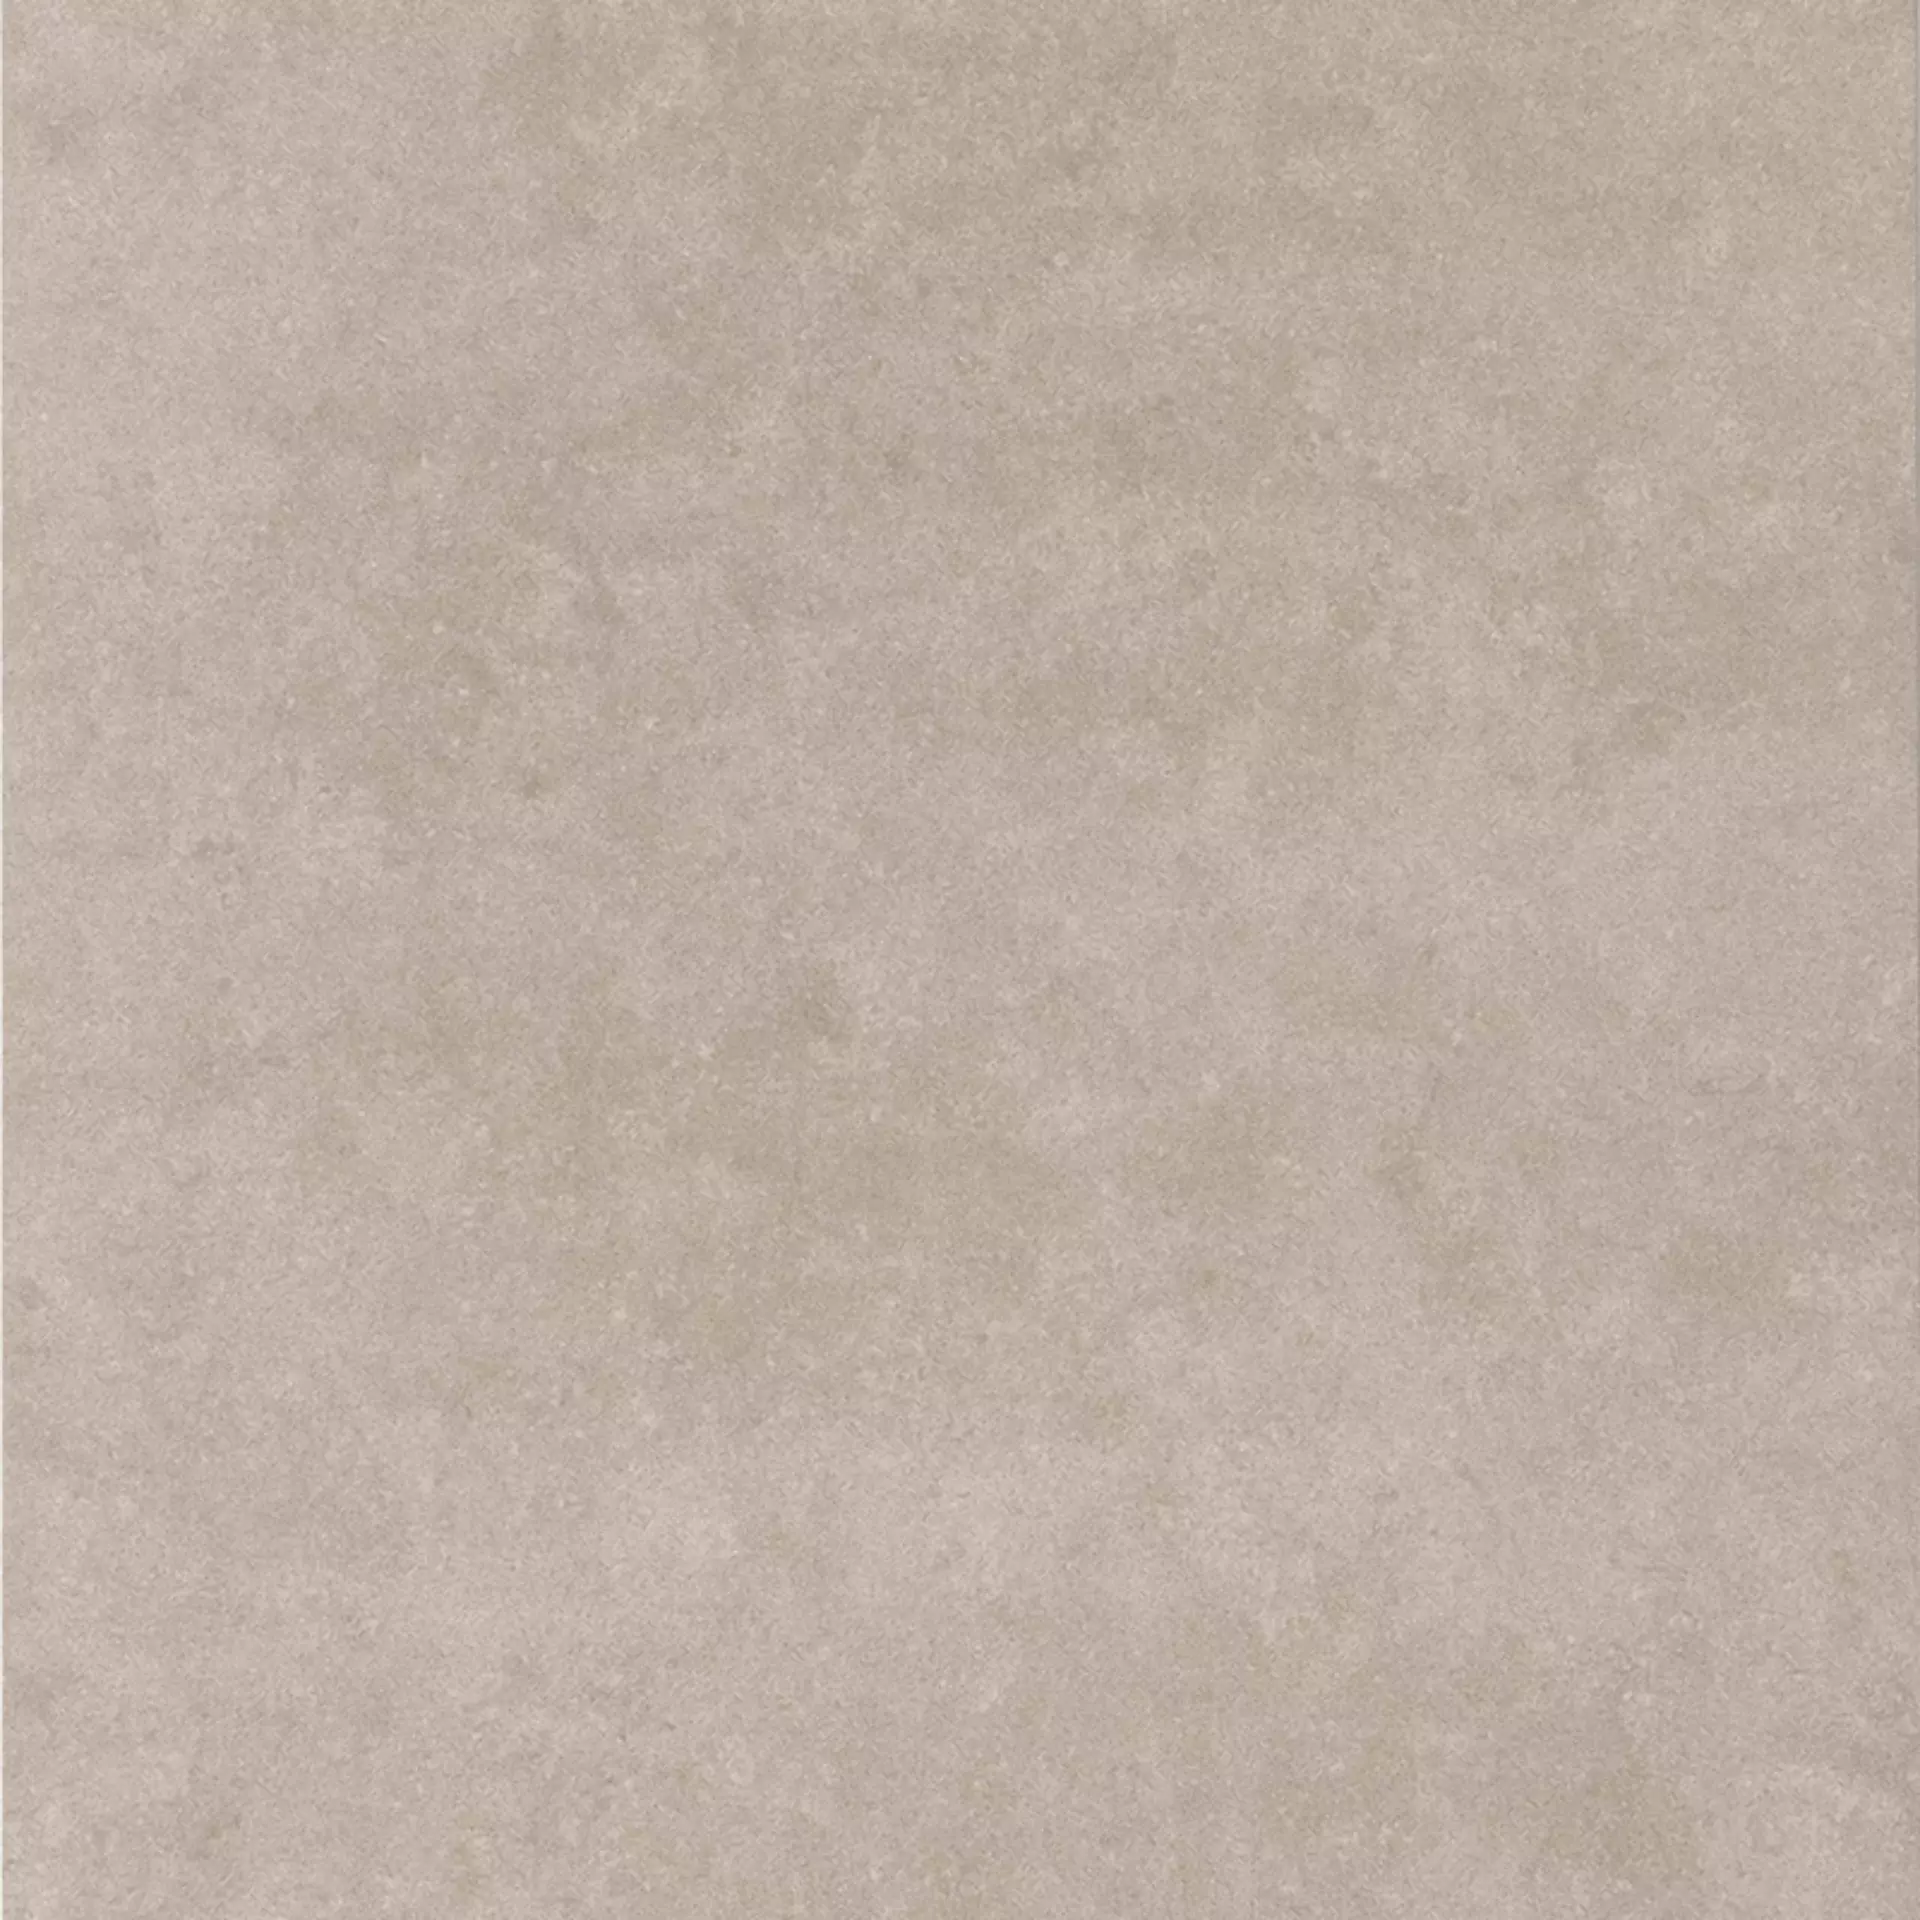 Casalgrande Timeless Taupe Levigato 14147049 60x120cm rectified 9,4mm